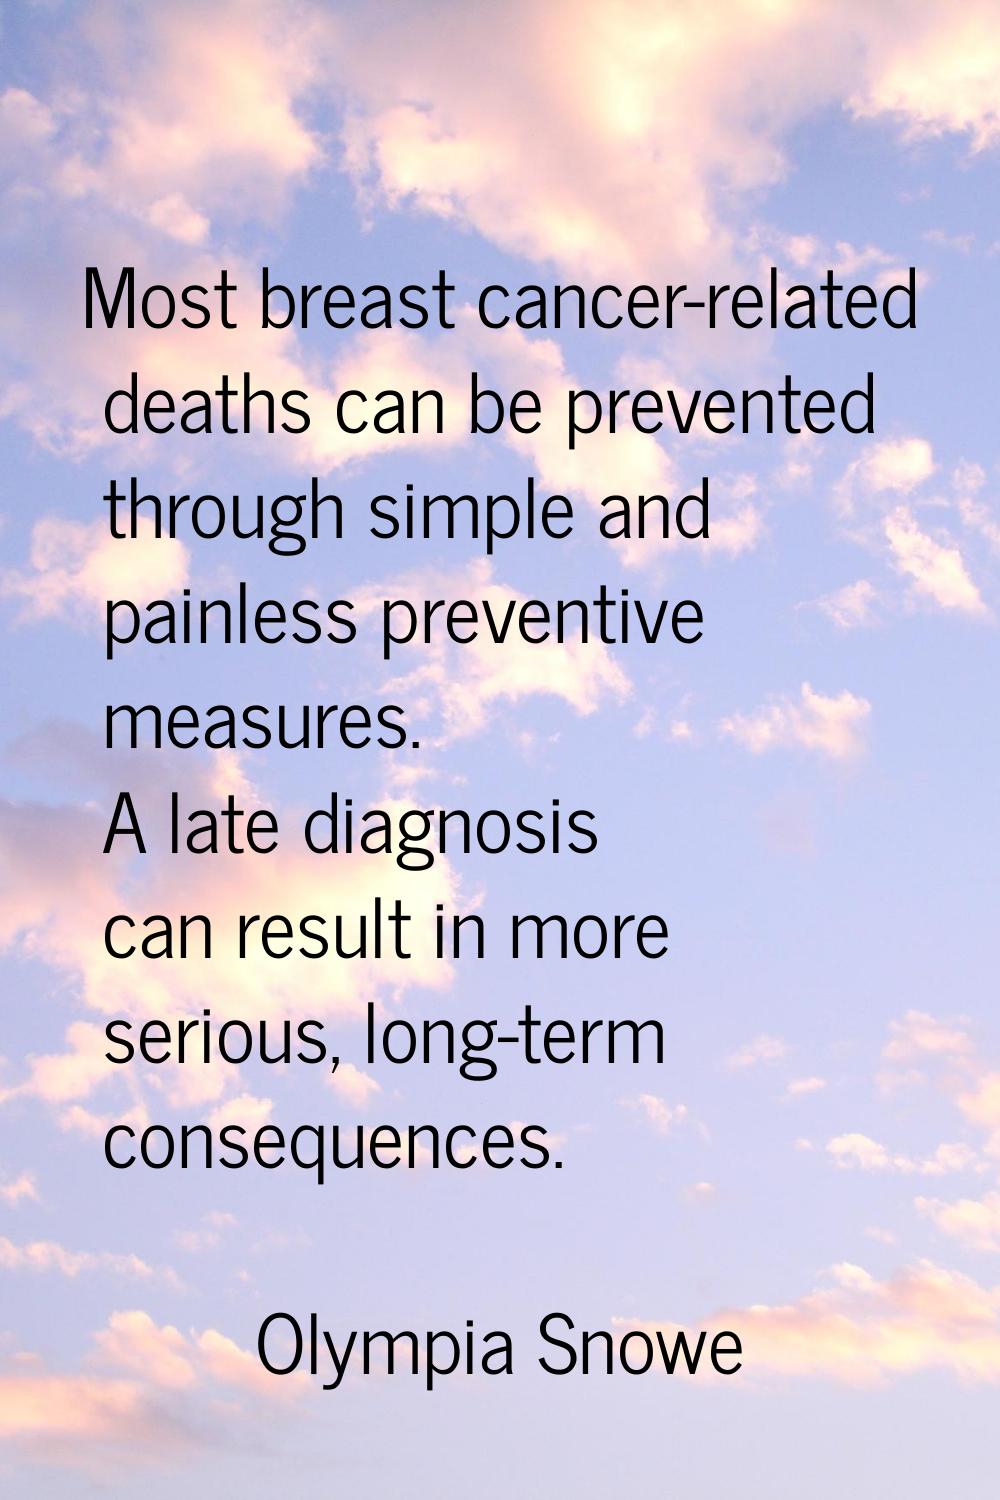 Most breast cancer-related deaths can be prevented through simple and painless preventive measures.